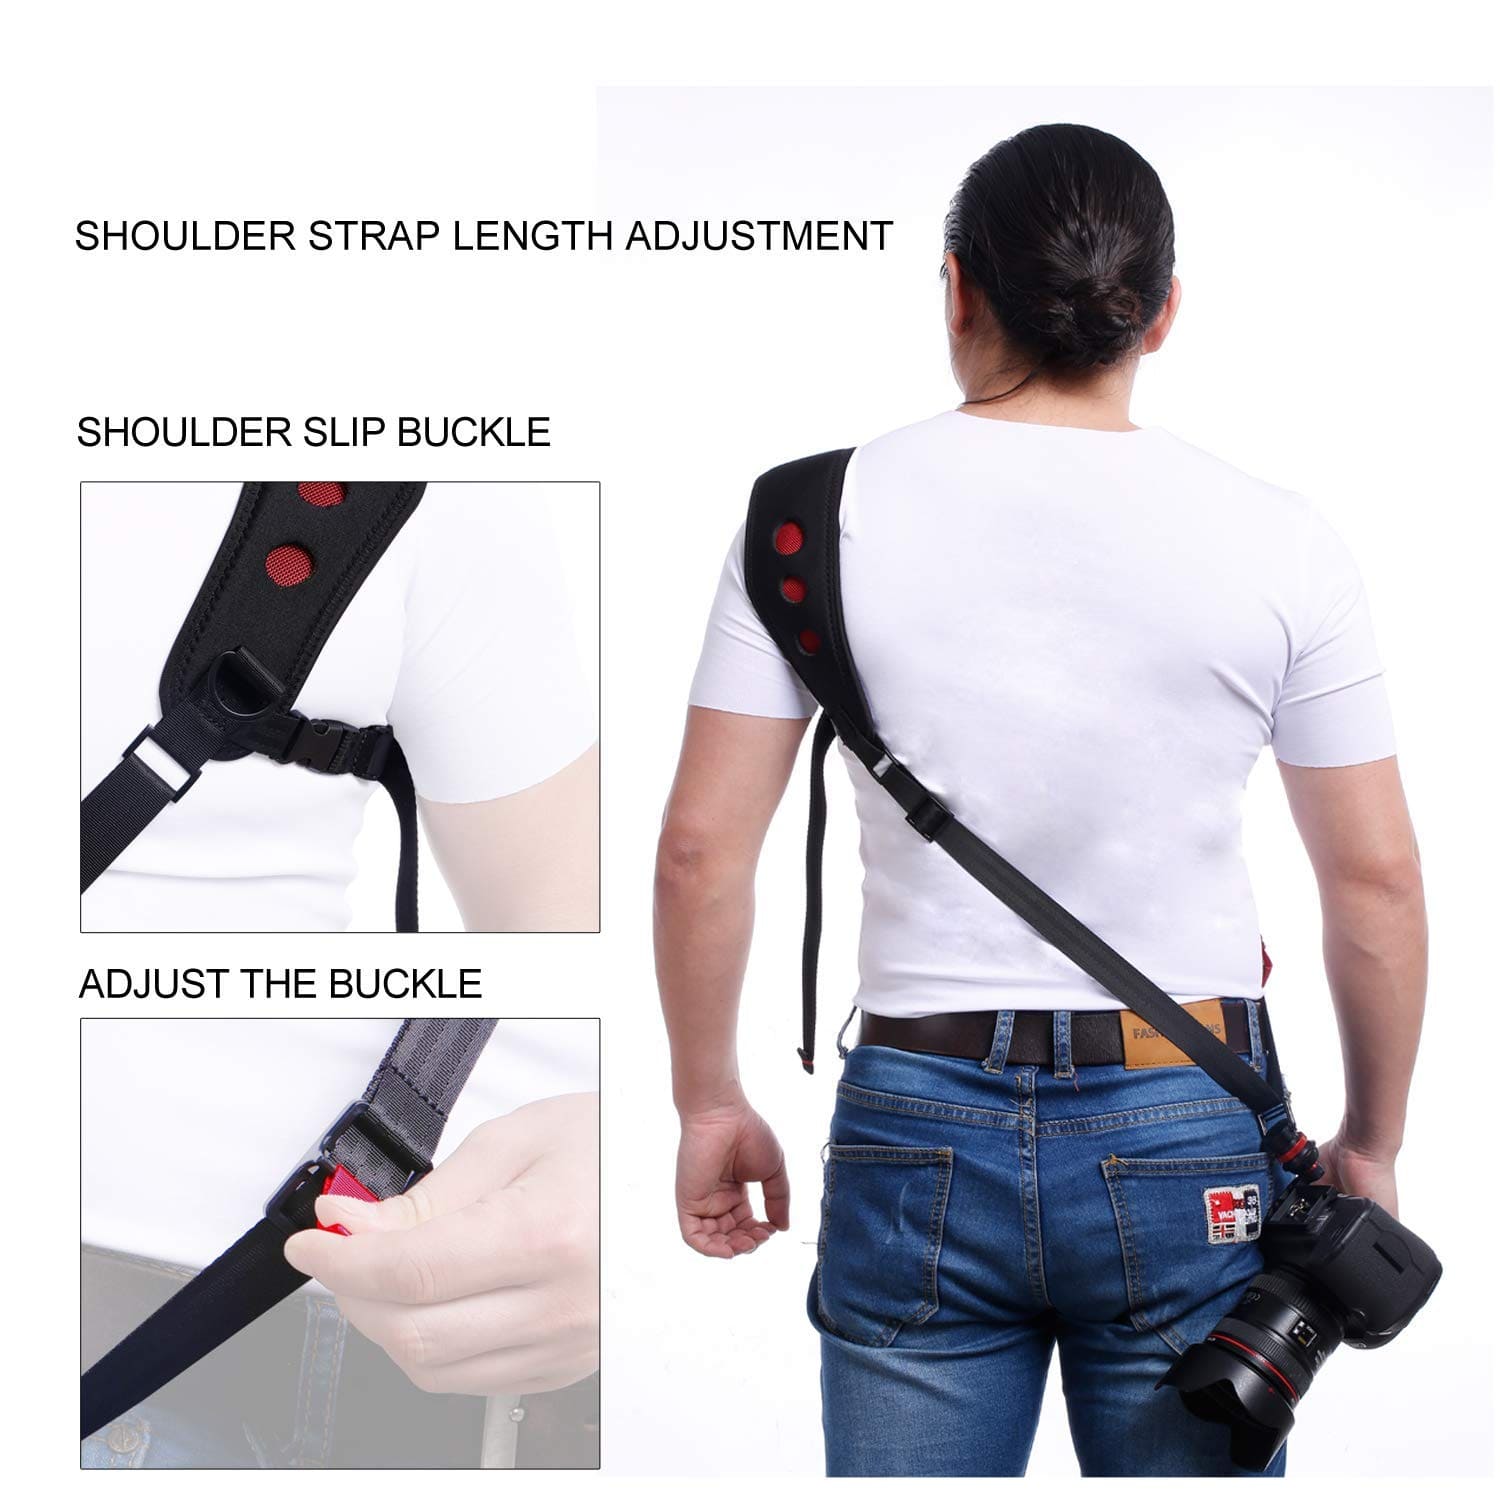 DSLR Camera Sling With Quick Release Plate